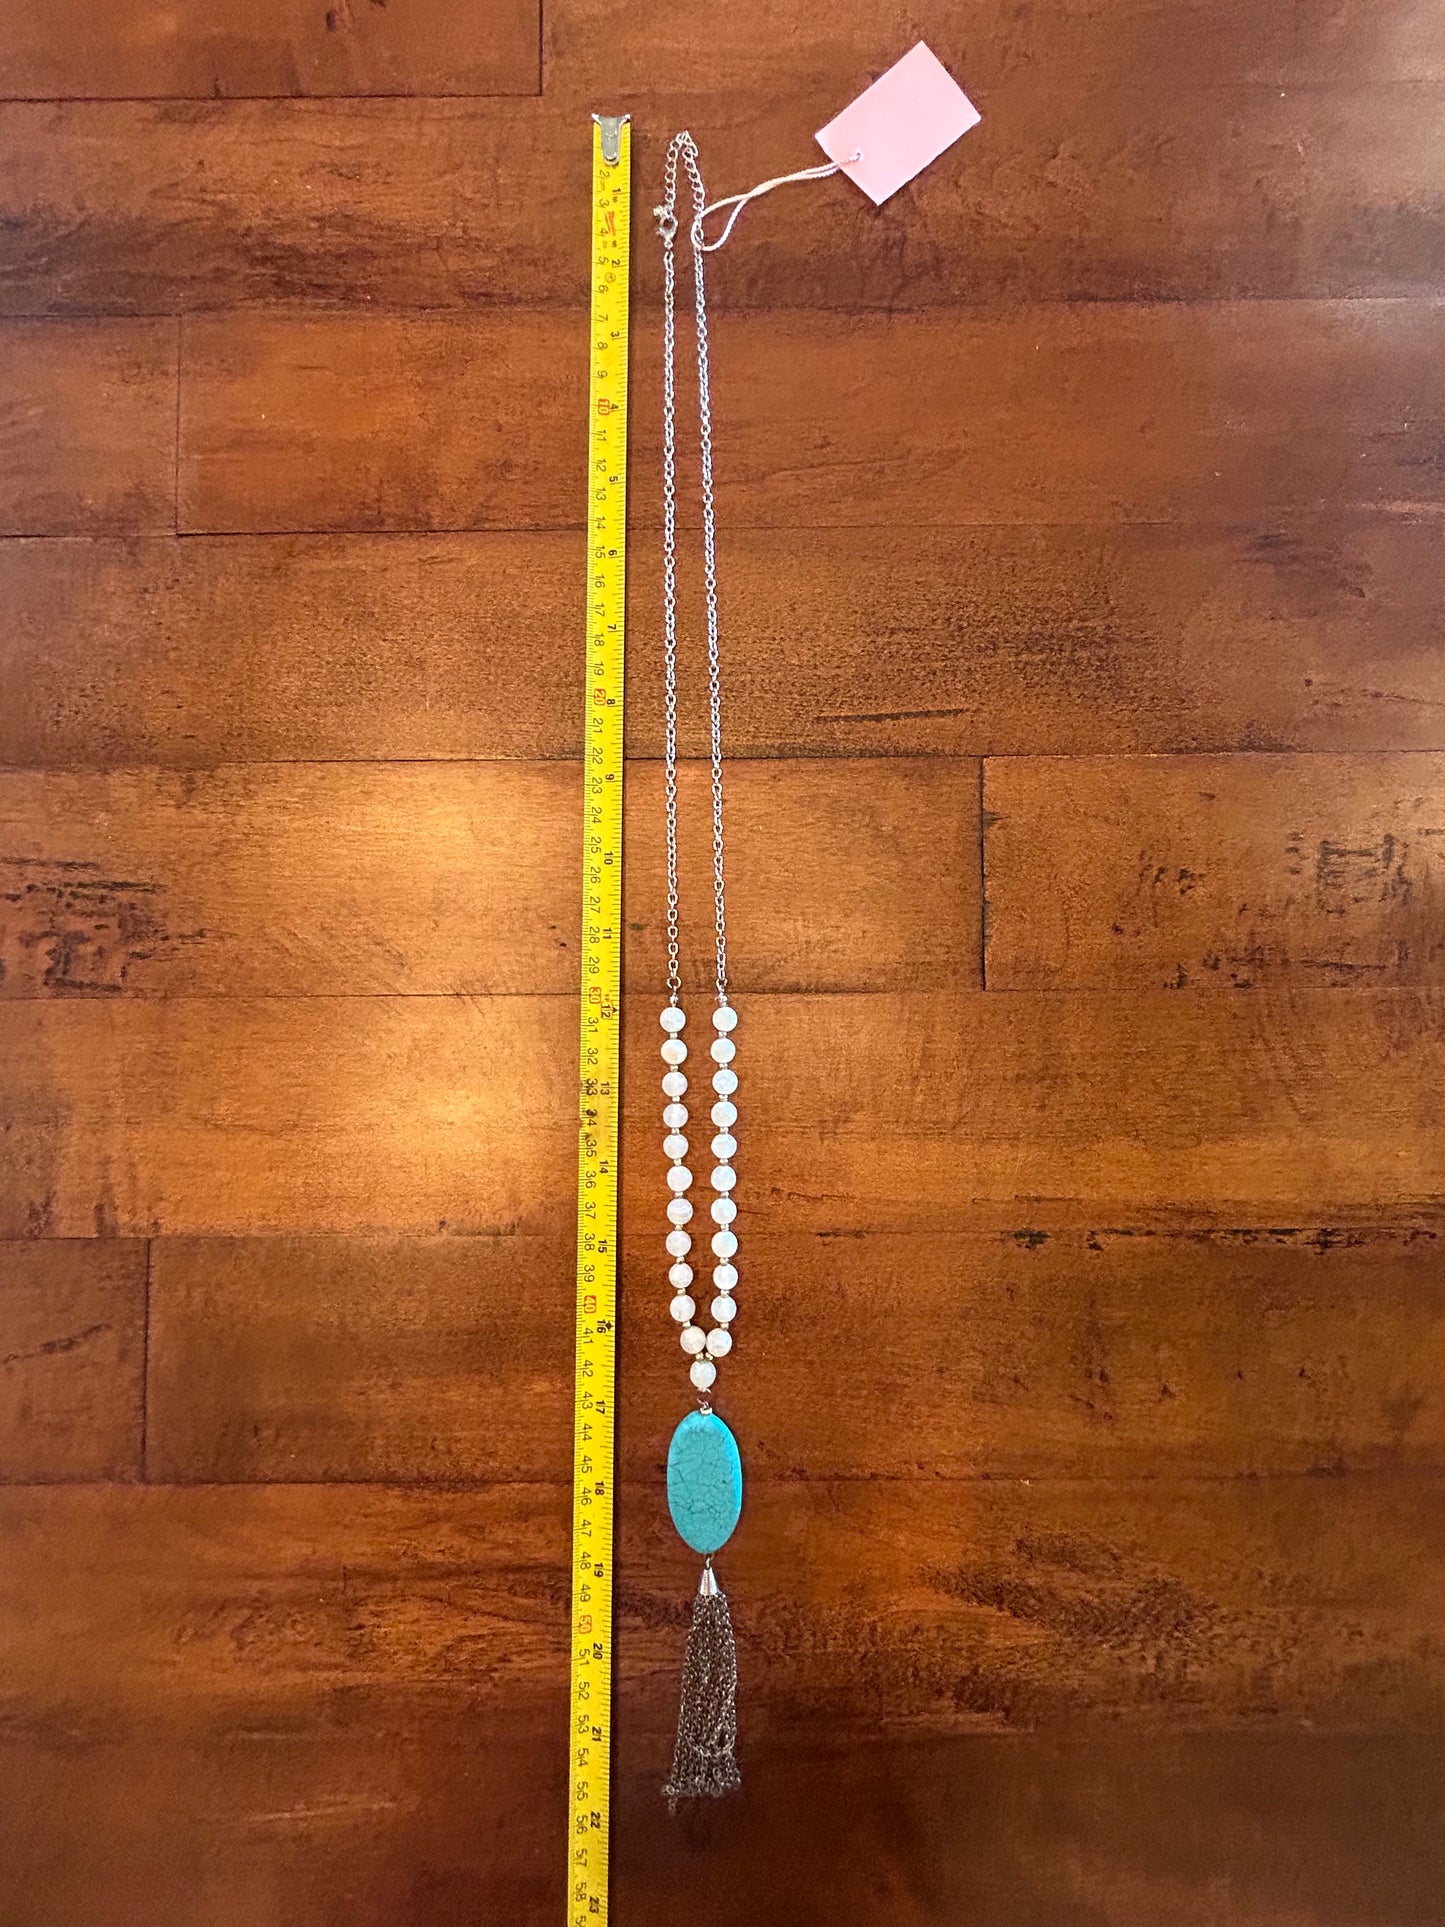 Turquoise & Gold Necklace with Beads